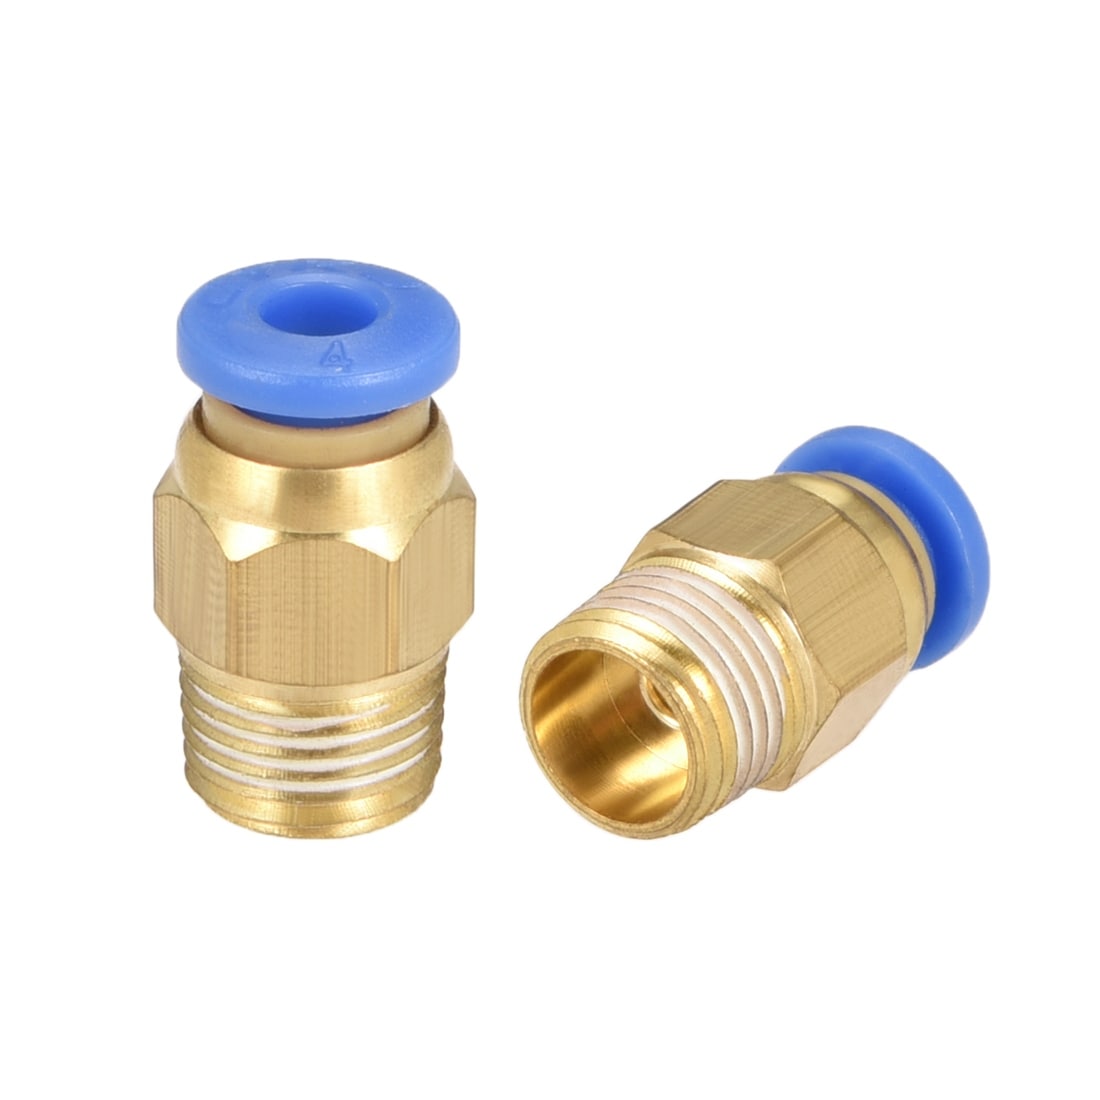 10 Pcs 1/4" PT Female Thread 4mm Push In Joint Pneumatic Quick Fittings 